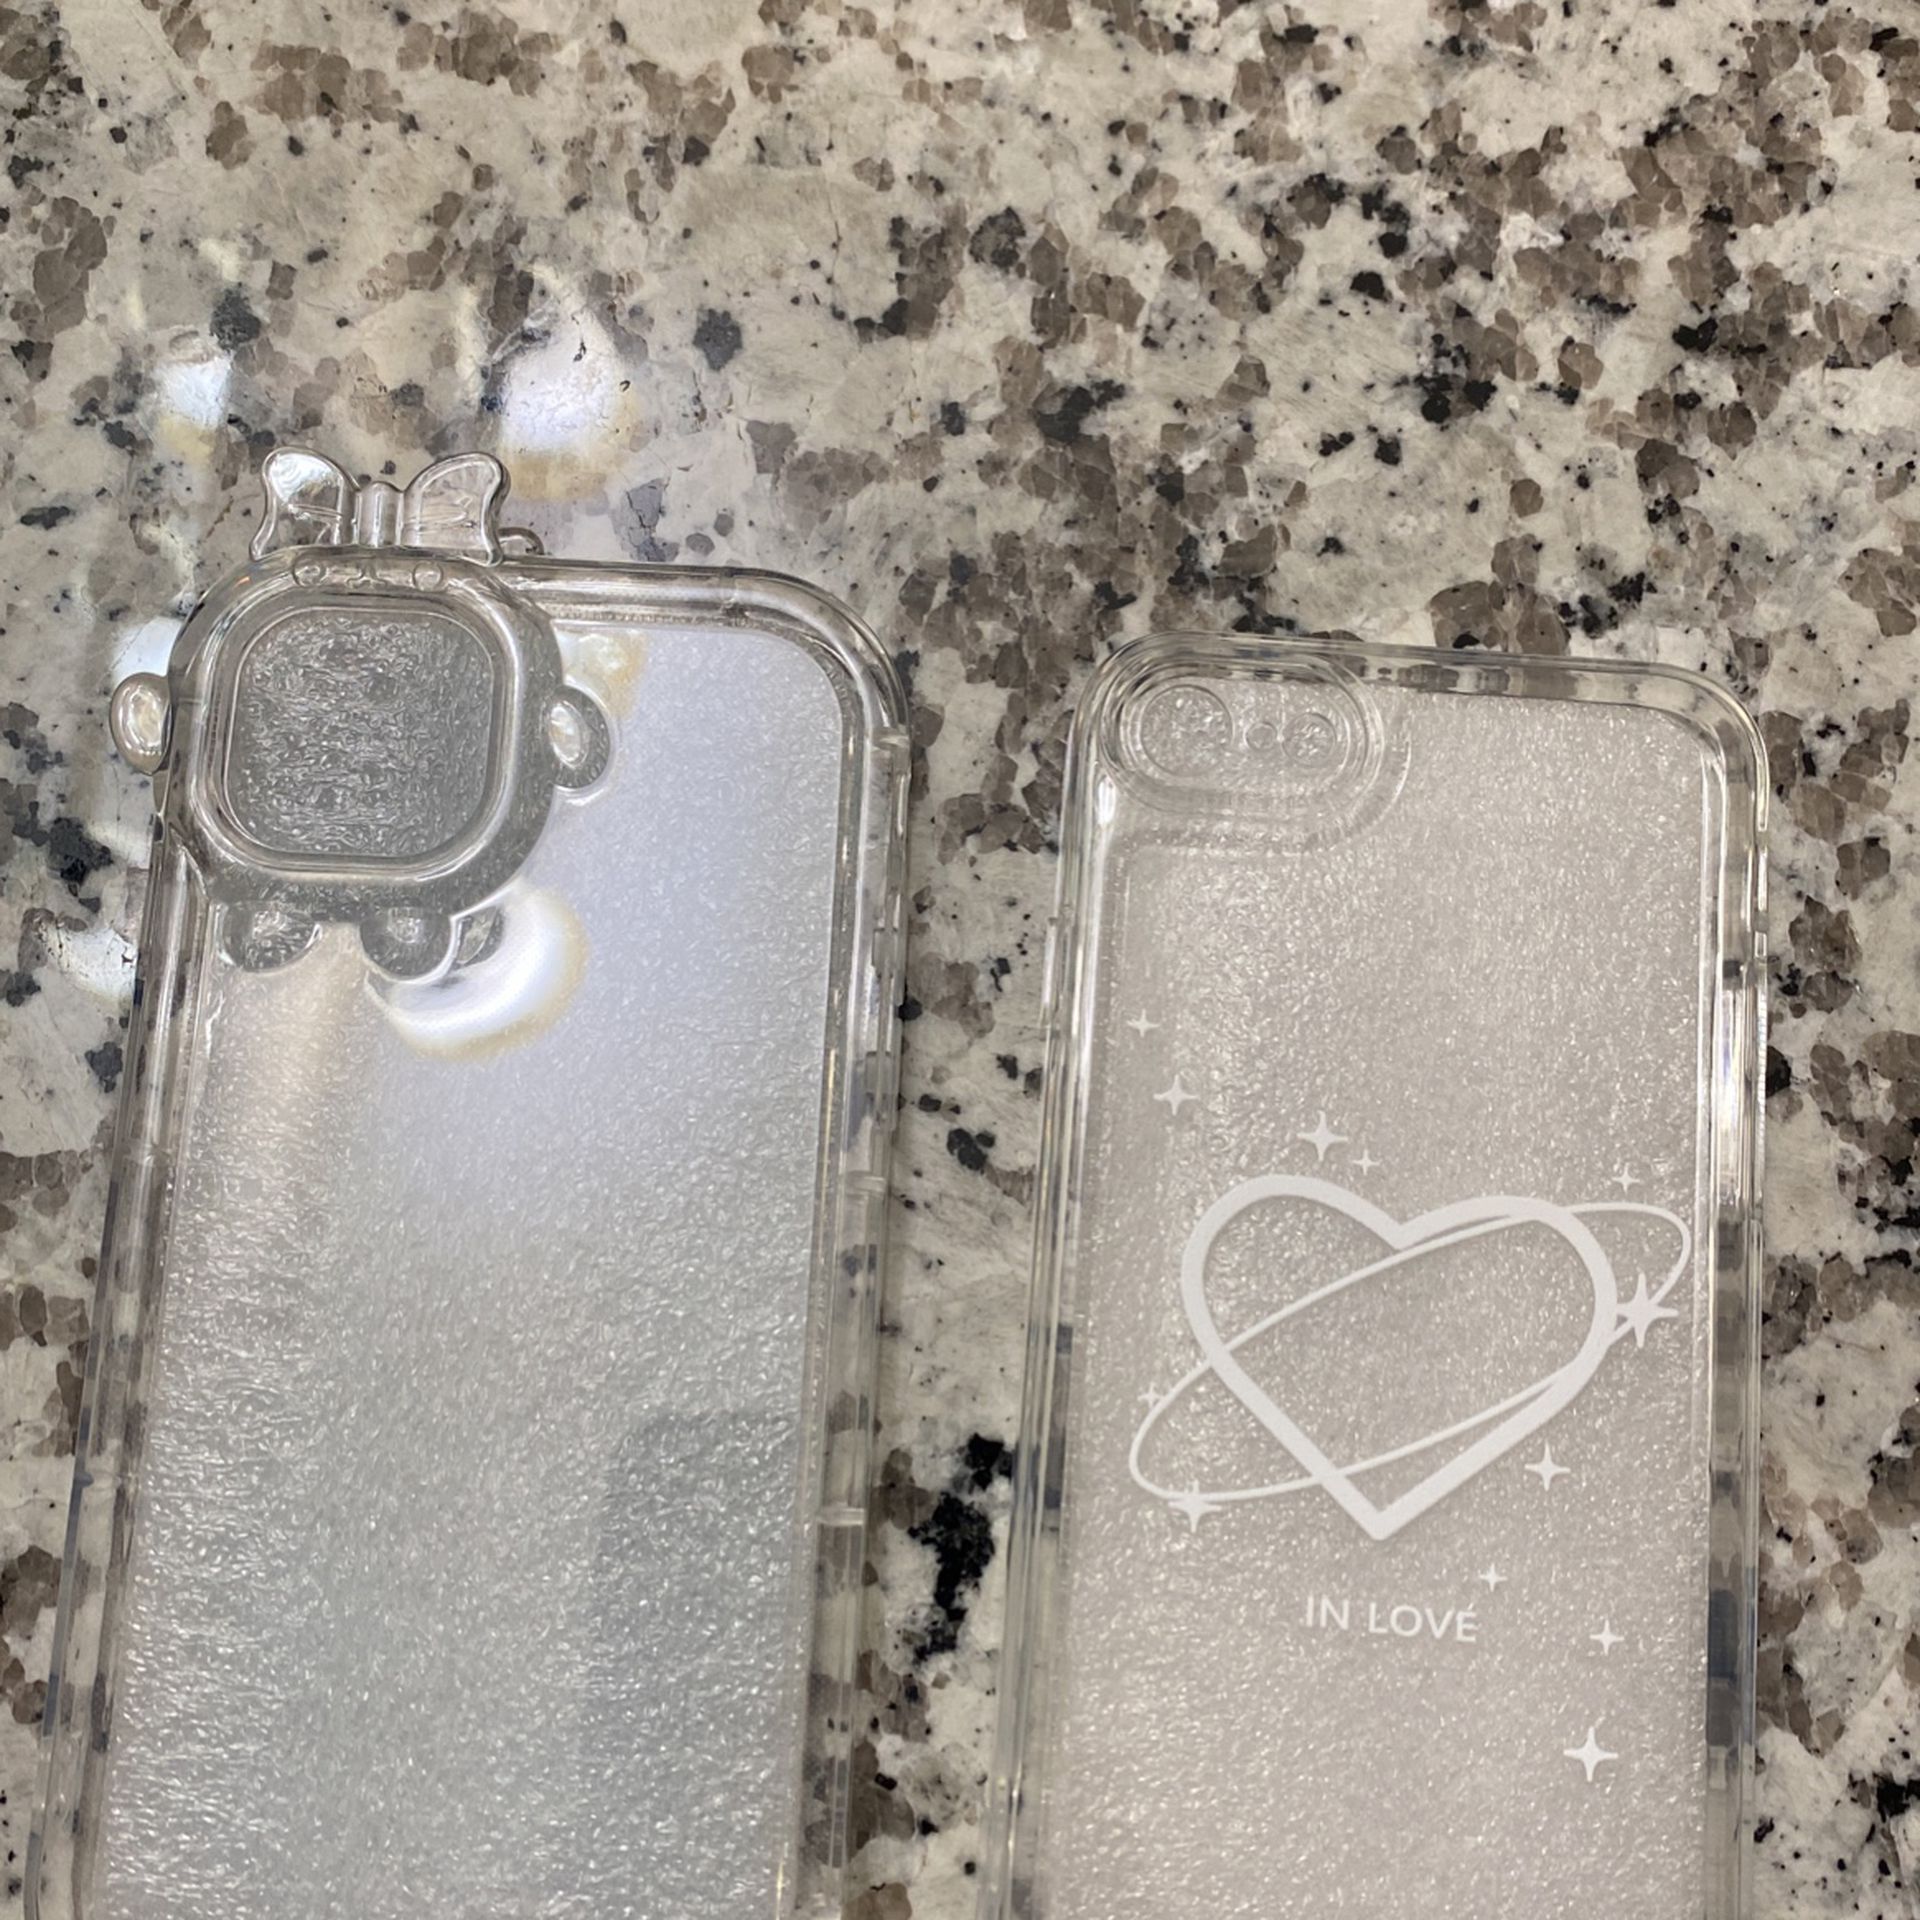 2 Brand New Iphone 7/8/Or SE Cases.